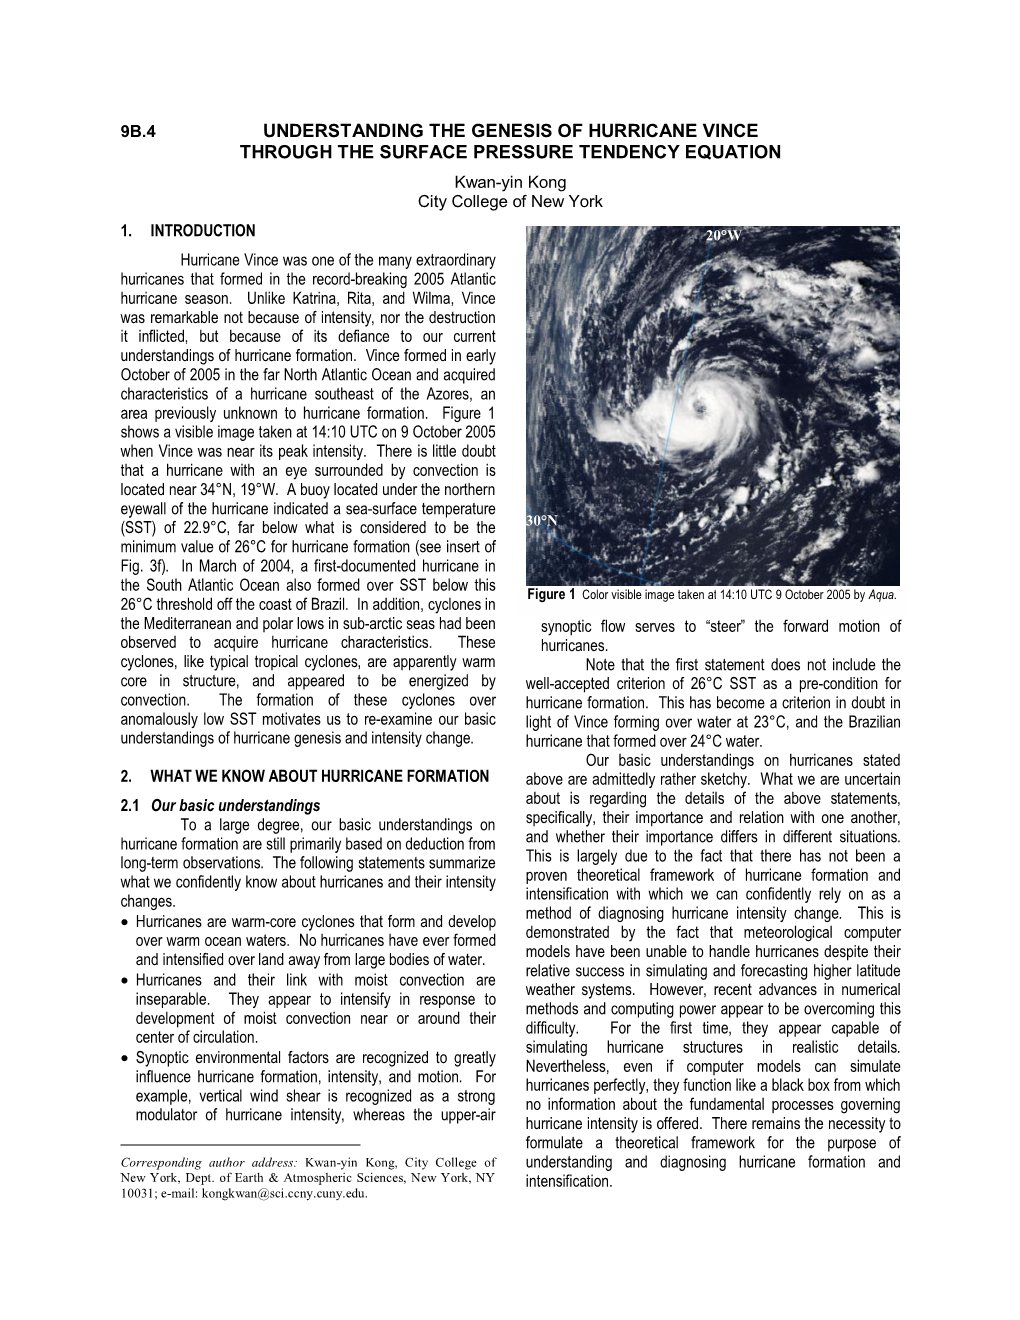 UNDERSTANDING the GENESIS of HURRICANE VINCE THROUGH the SURFACE PRESSURE TENDENCY EQUATION Kwan-Yin Kong City College of New York 1 1